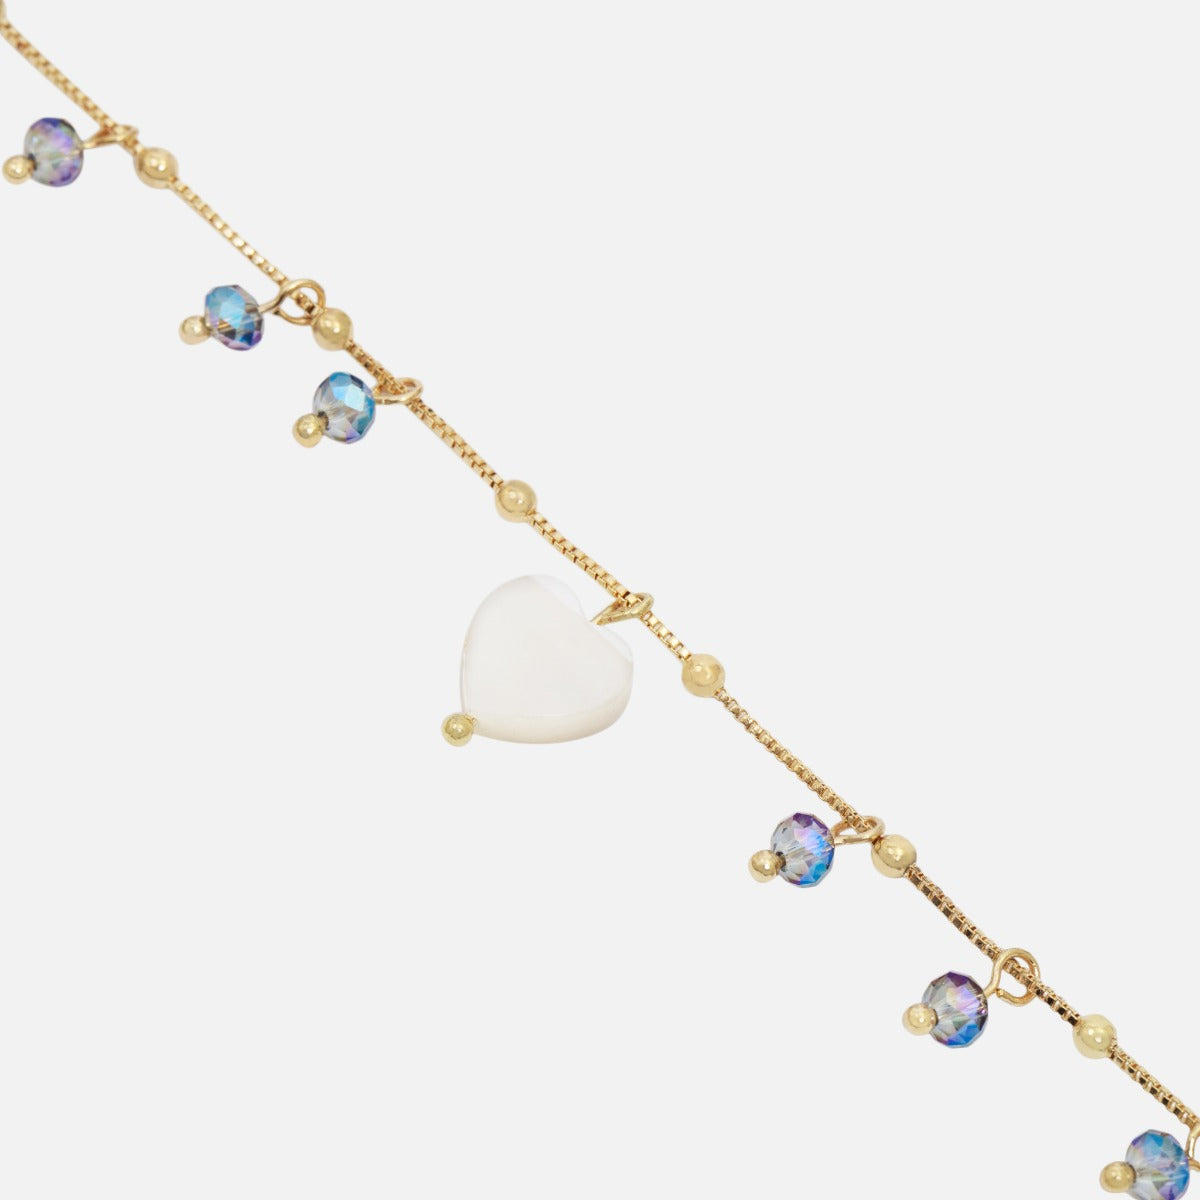 Golden ankle chain with blue beads and heart charms